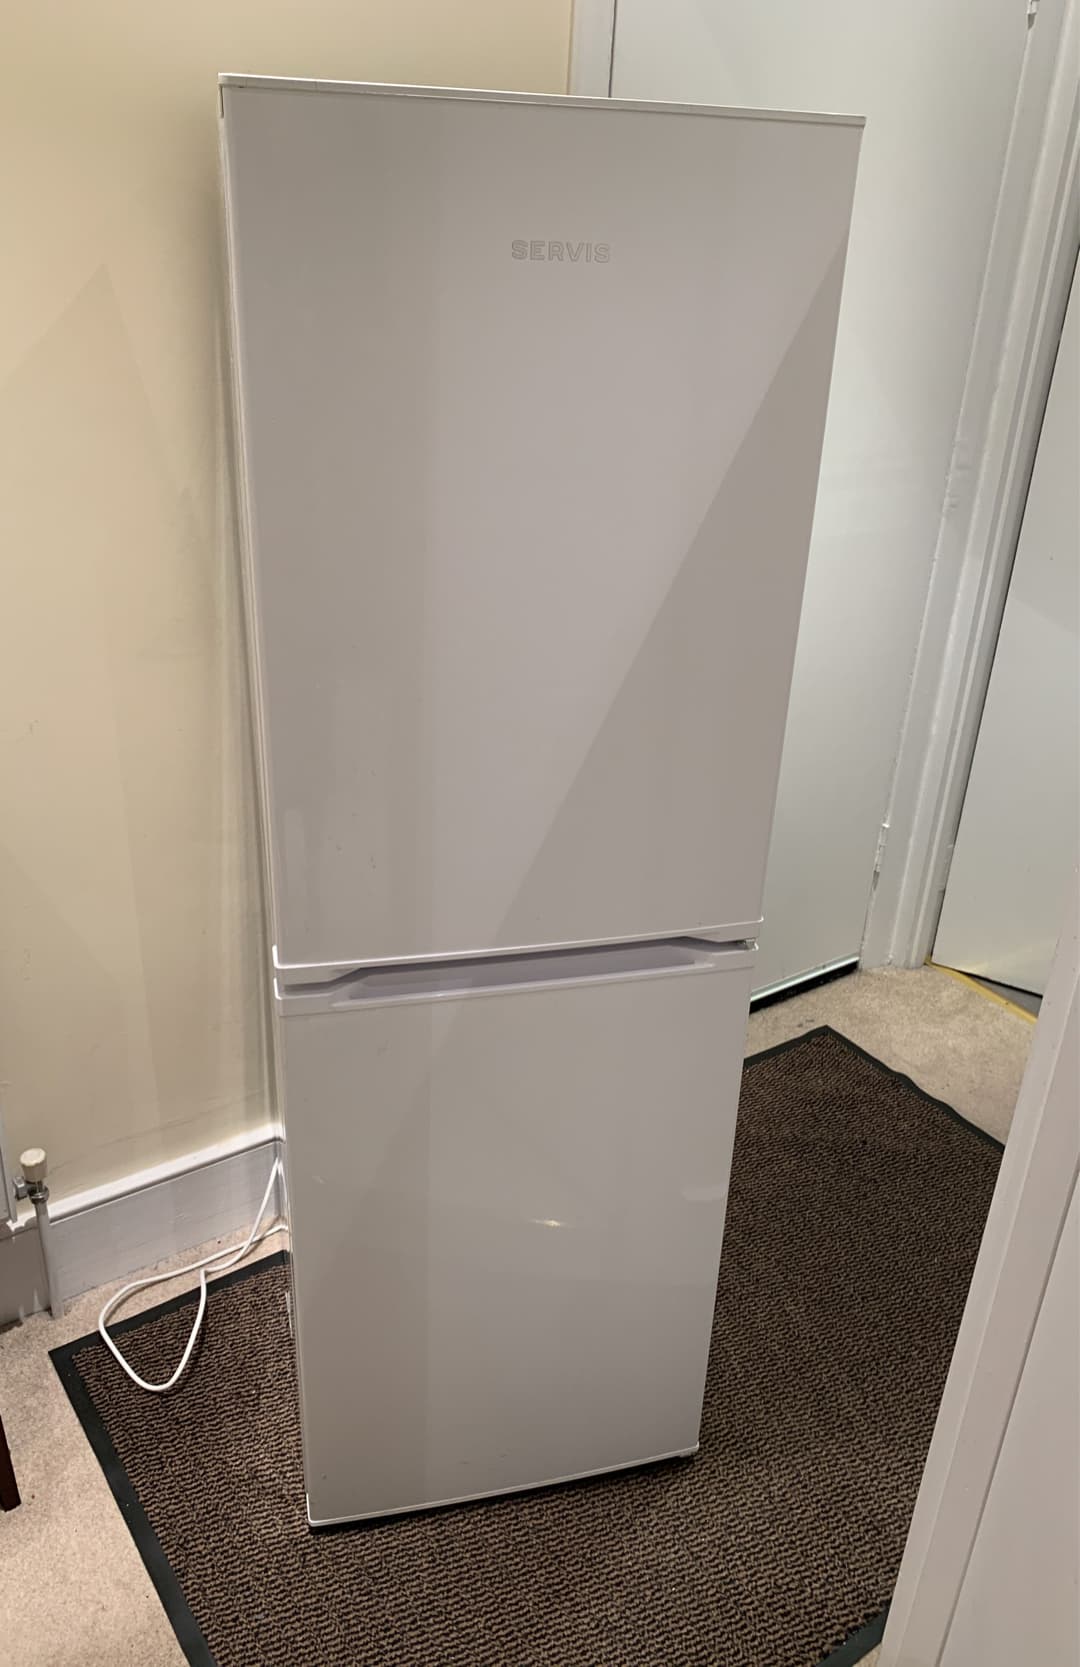 a tall fridge removed for bargain £50 price